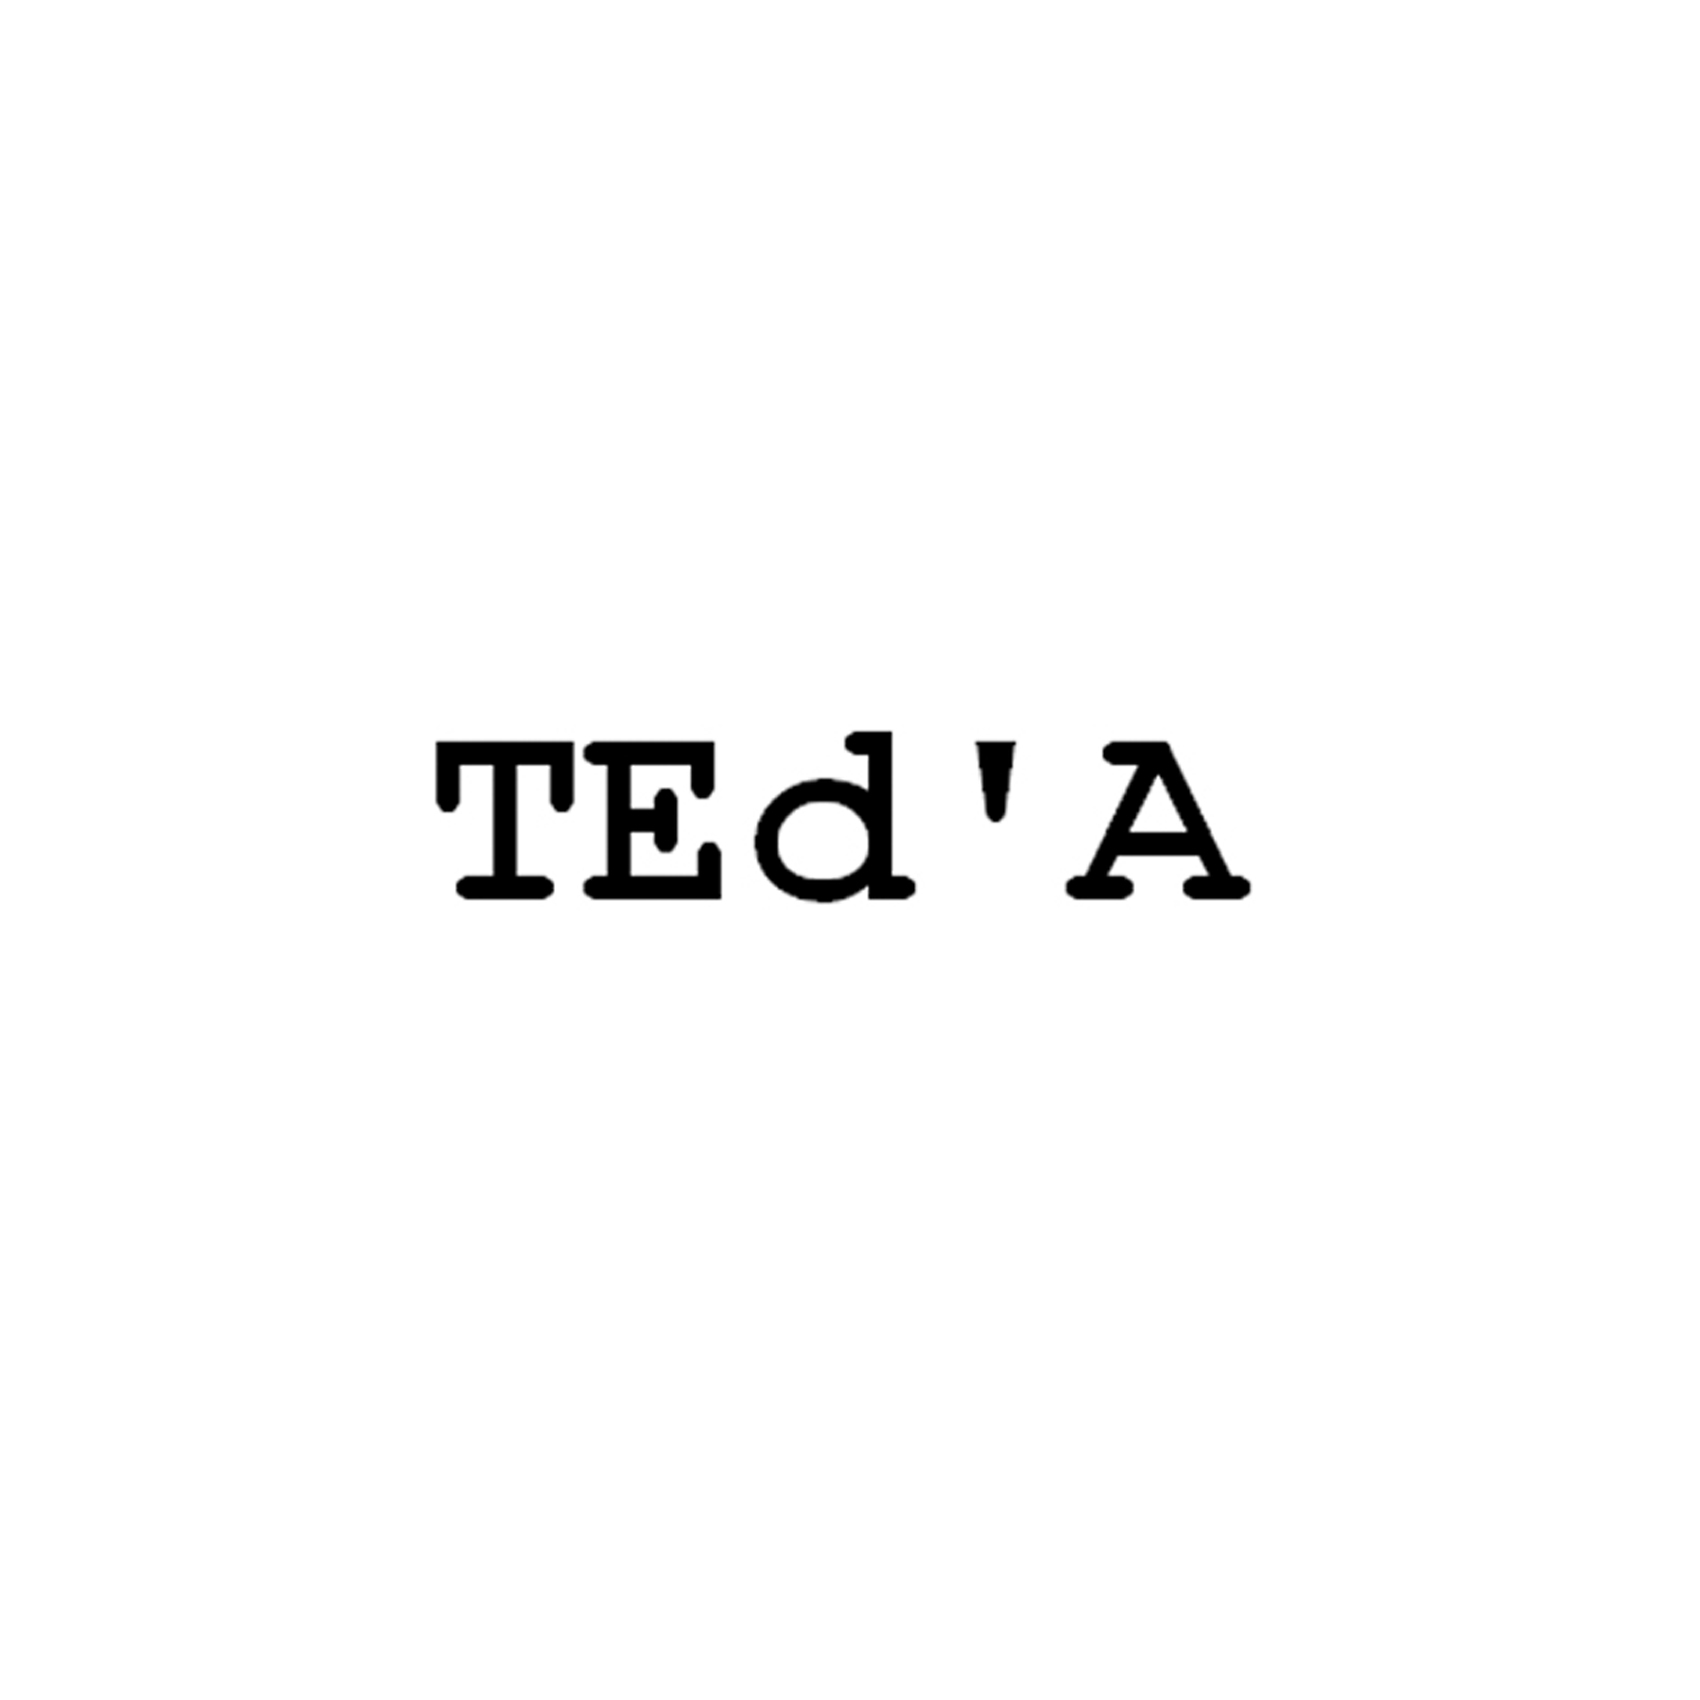 TEd’A arquitectes